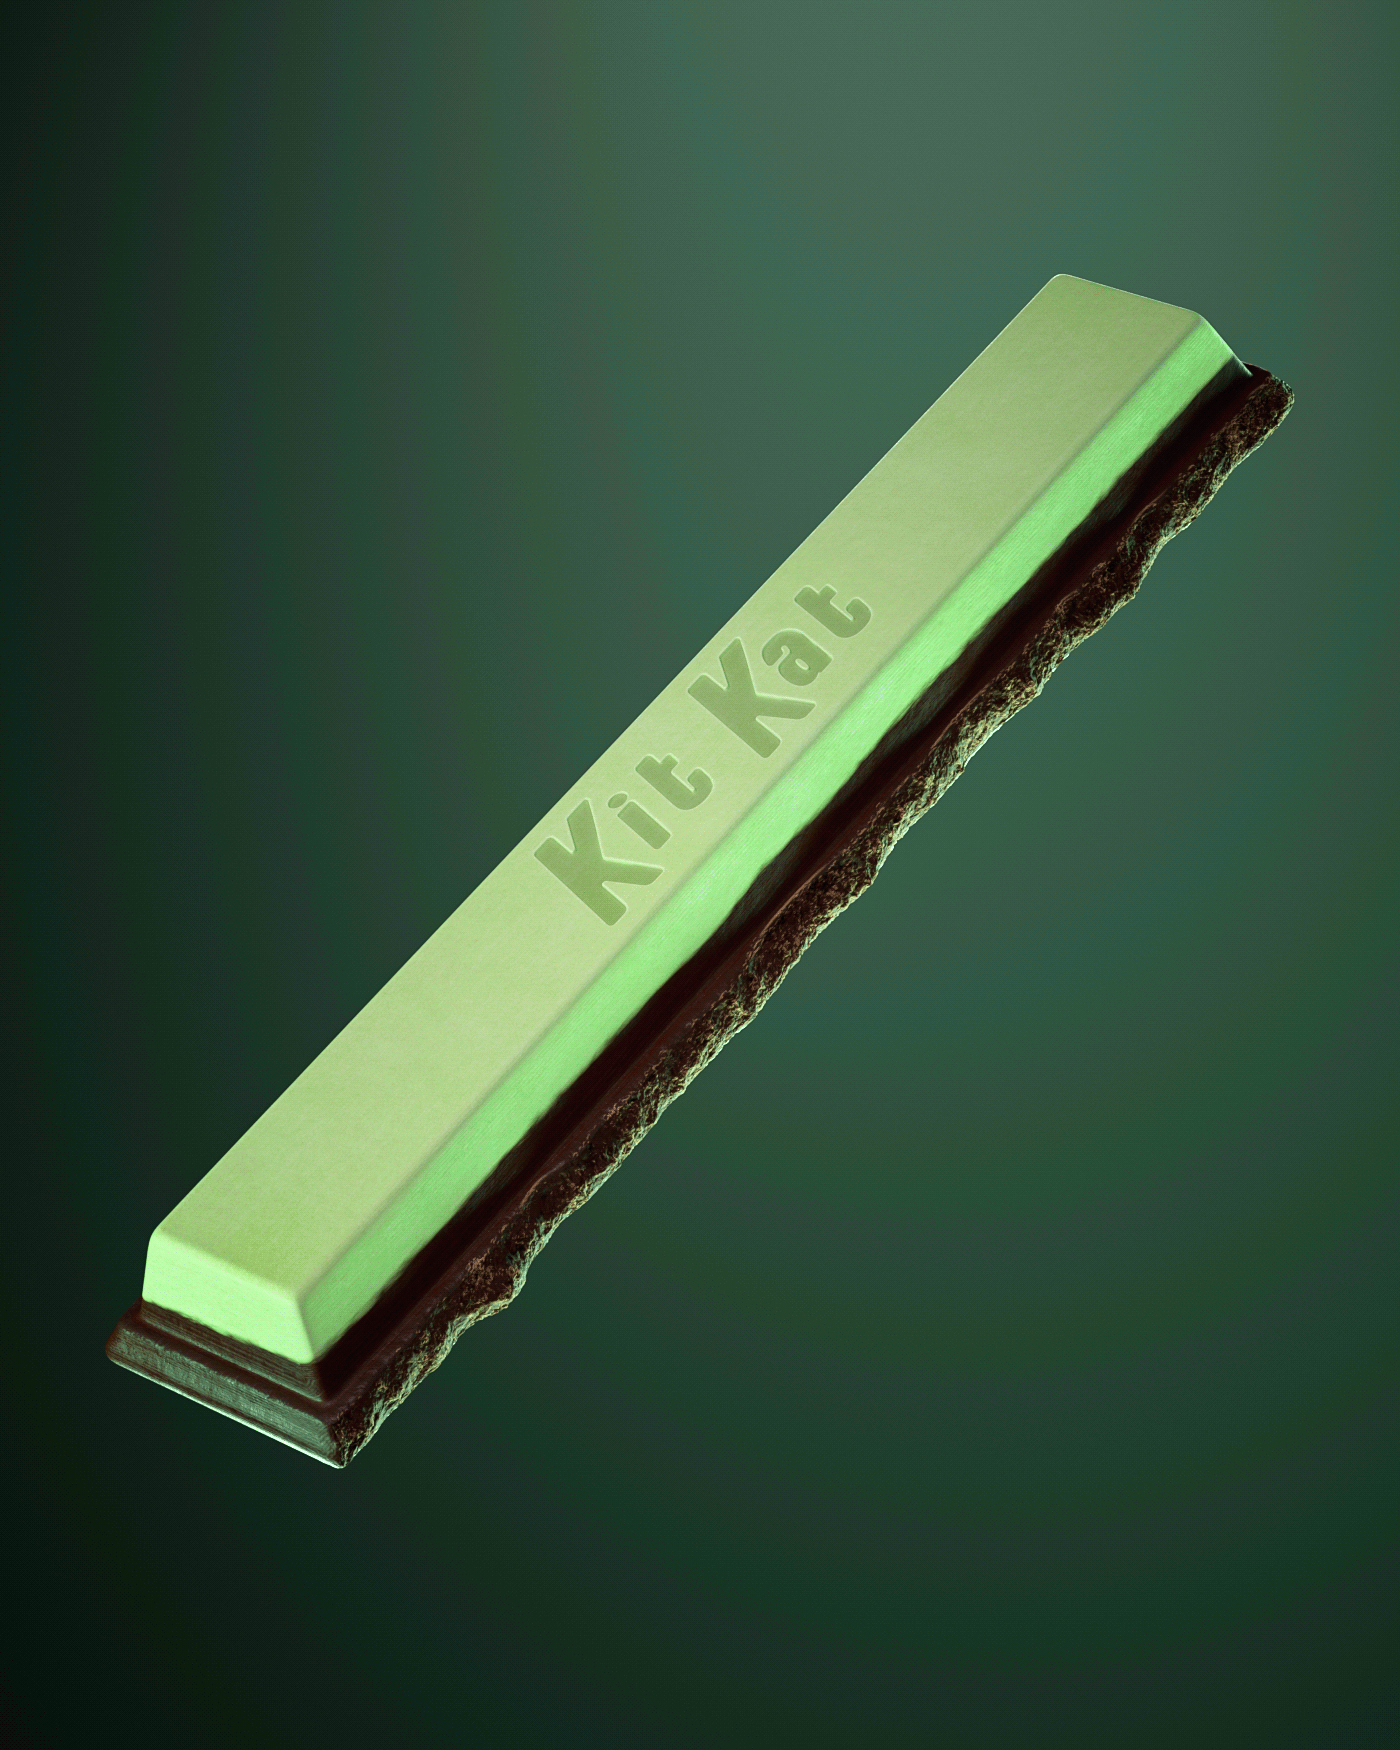 kit kat chocolate powder Candy explotion colorful pastel green red